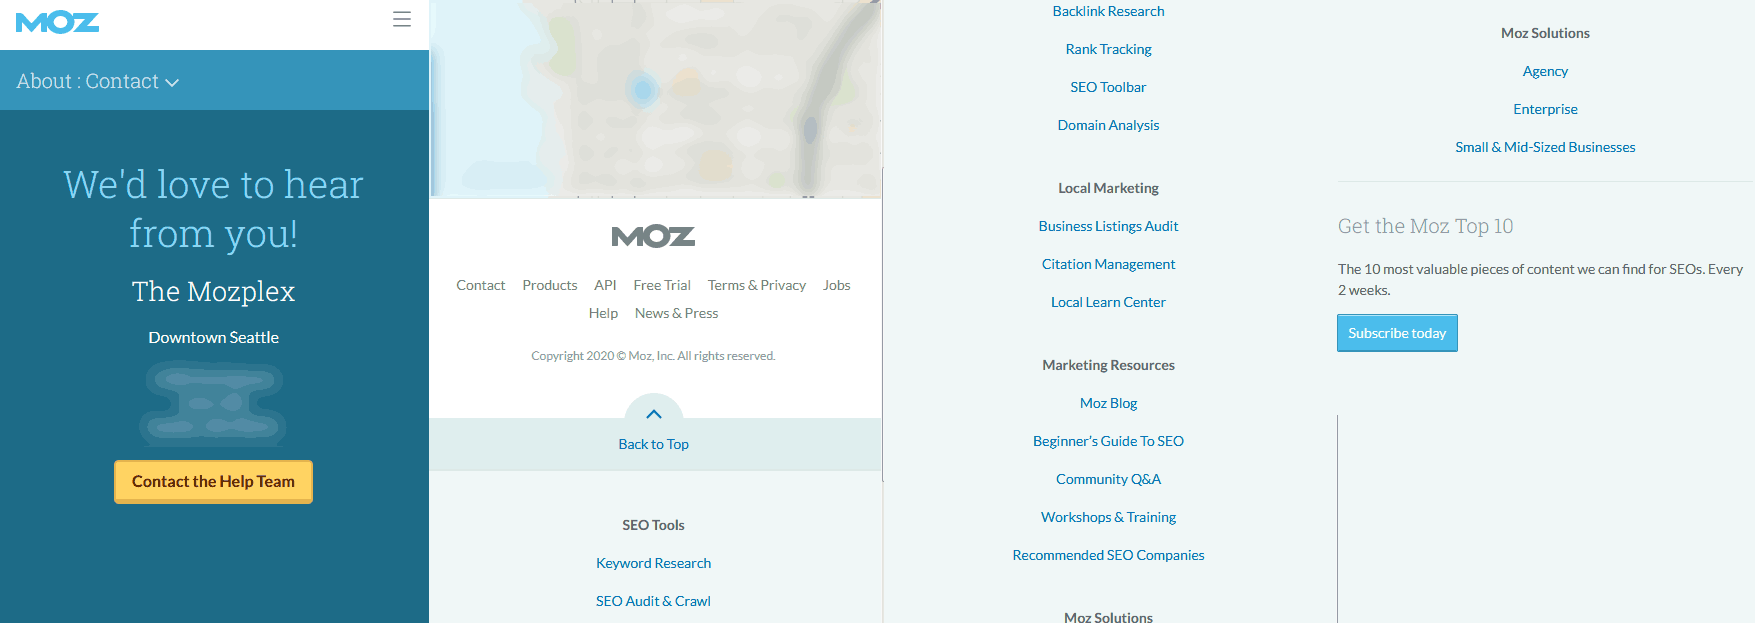 MOZ Contact Page.